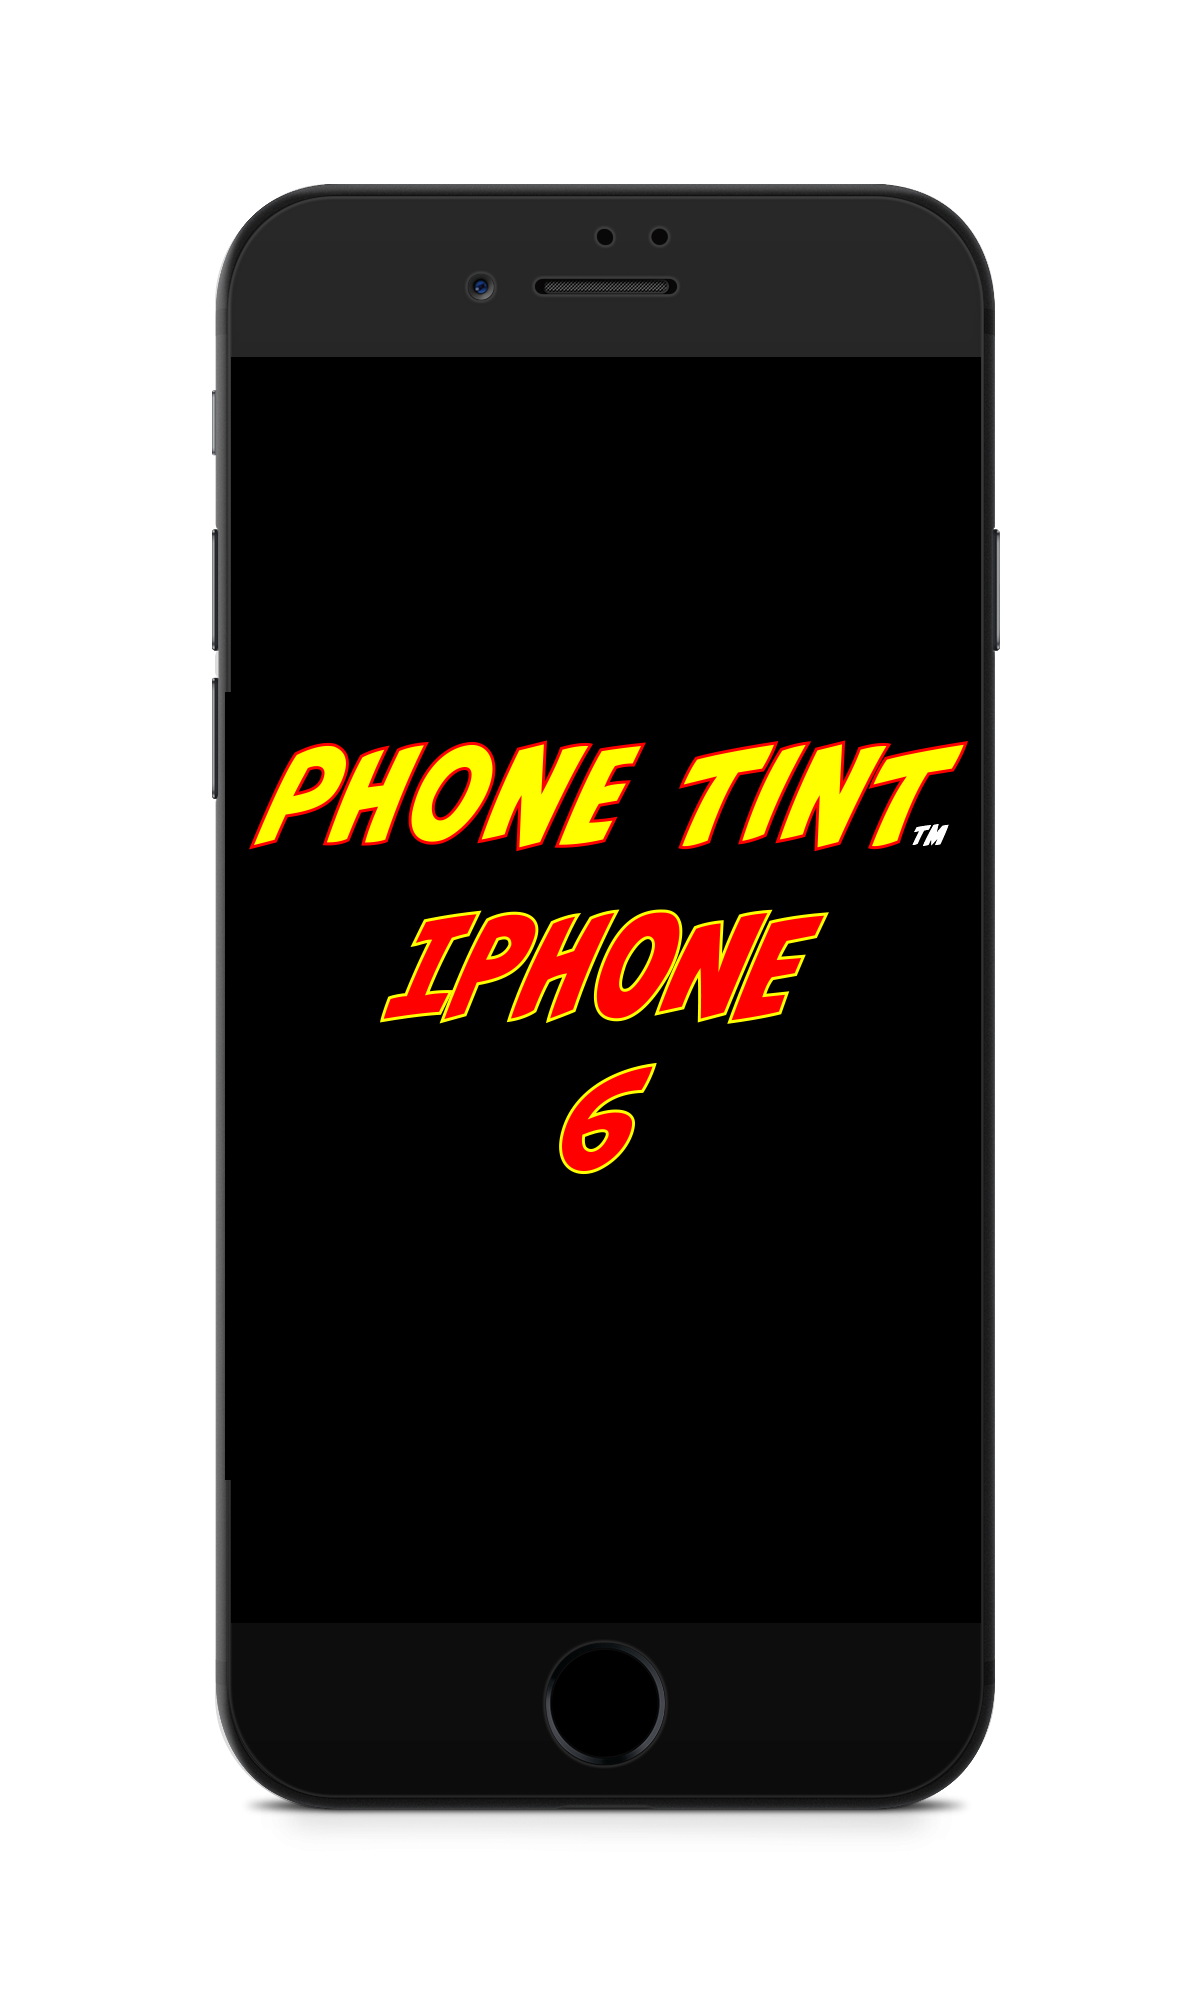 Iphone 6-6s phone tint privacy tempered glass screen protector. SKINZ Edmonton